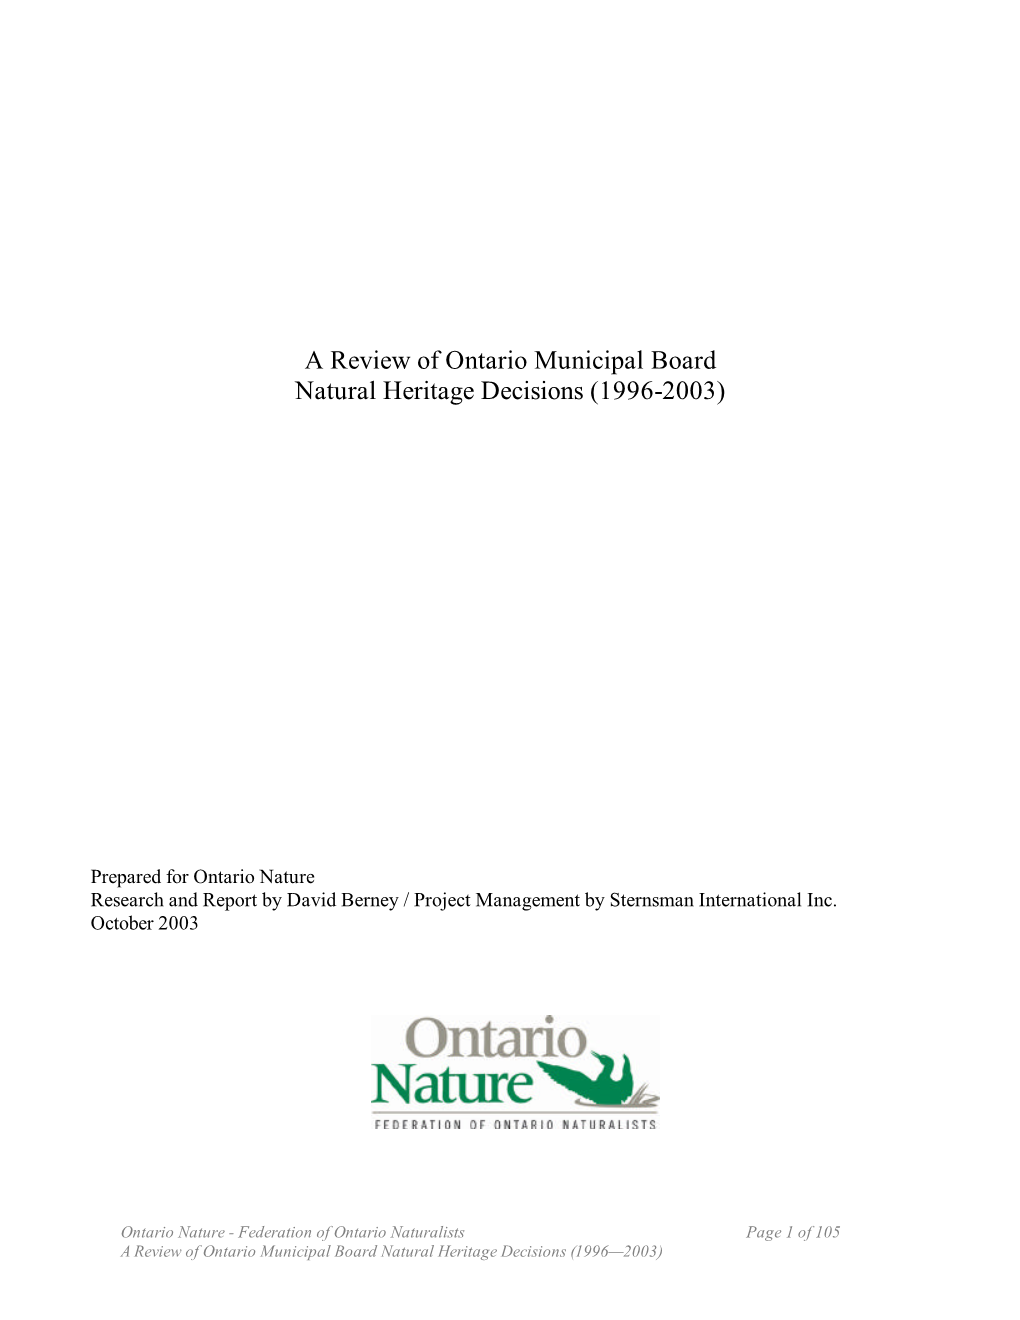 A Review of Ontario Municipal Board Natural Heritage Decisions (1996-2003)